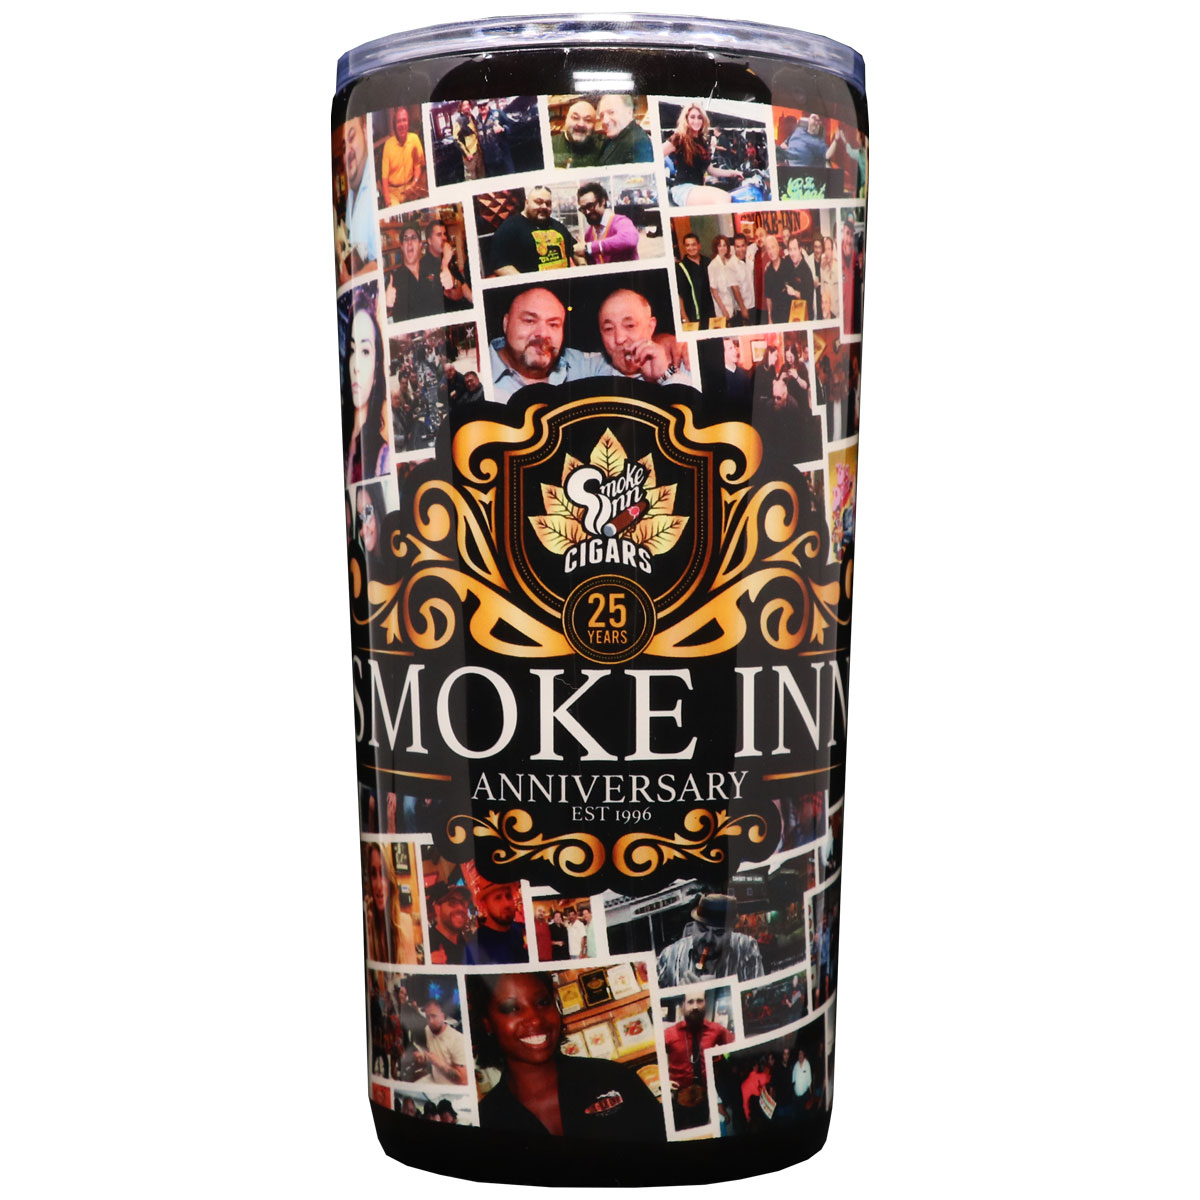 Limited Edition Smoke Inn Insulated Tumbler “25 Years”